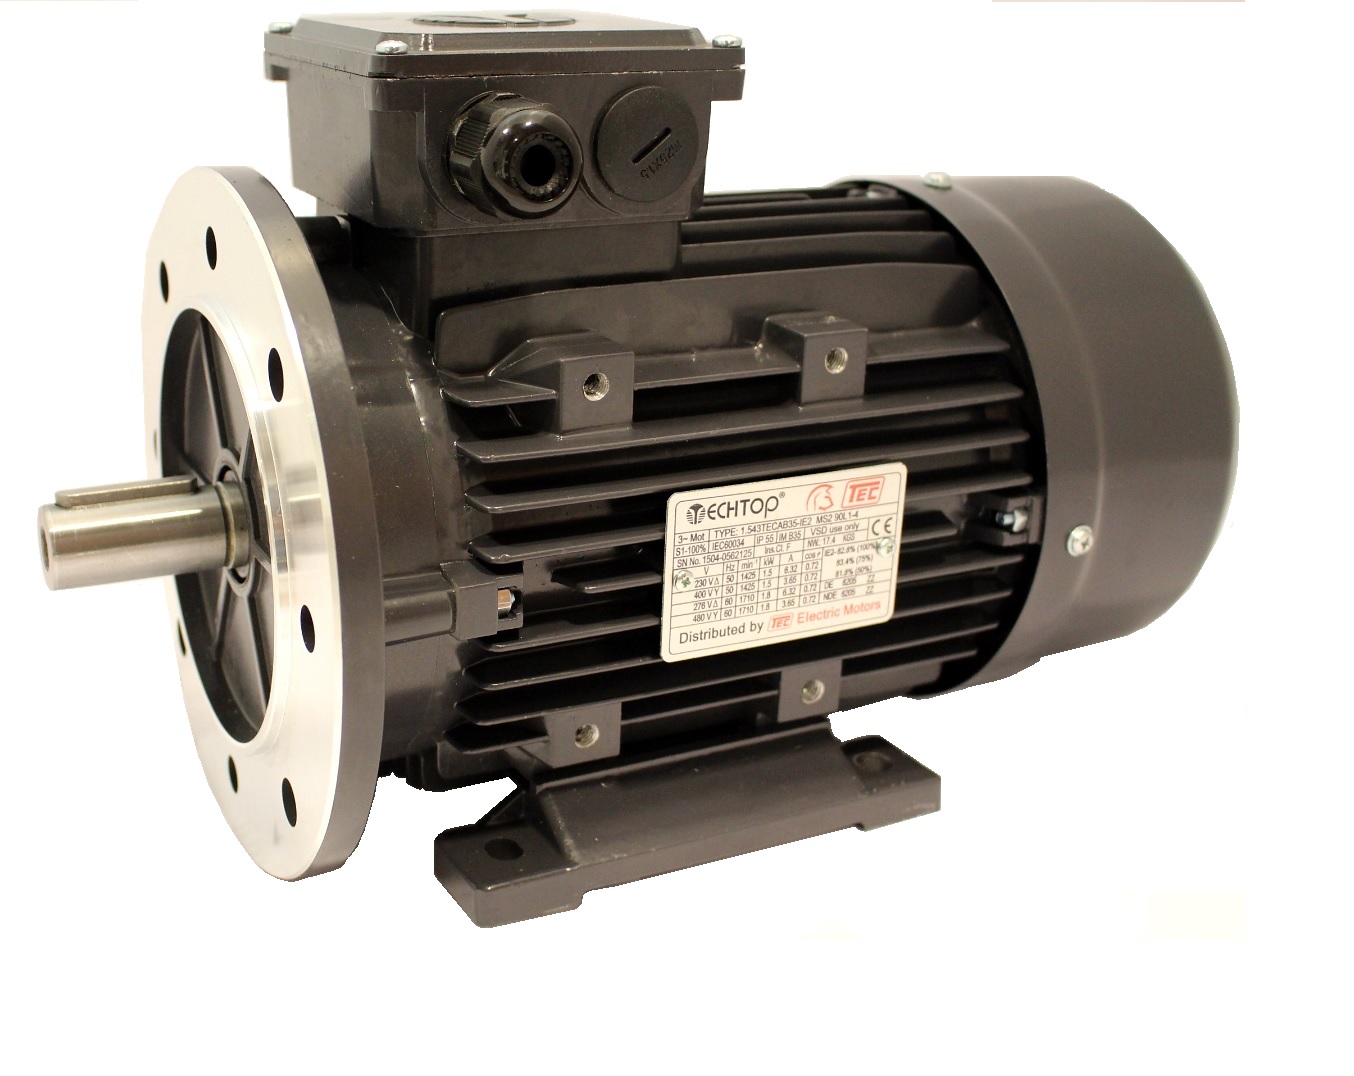 Three Phase 400v Electric Motor, 0.75Kw , D80 Frame, 4 pole 1500rpm with flange and foot mount IE3